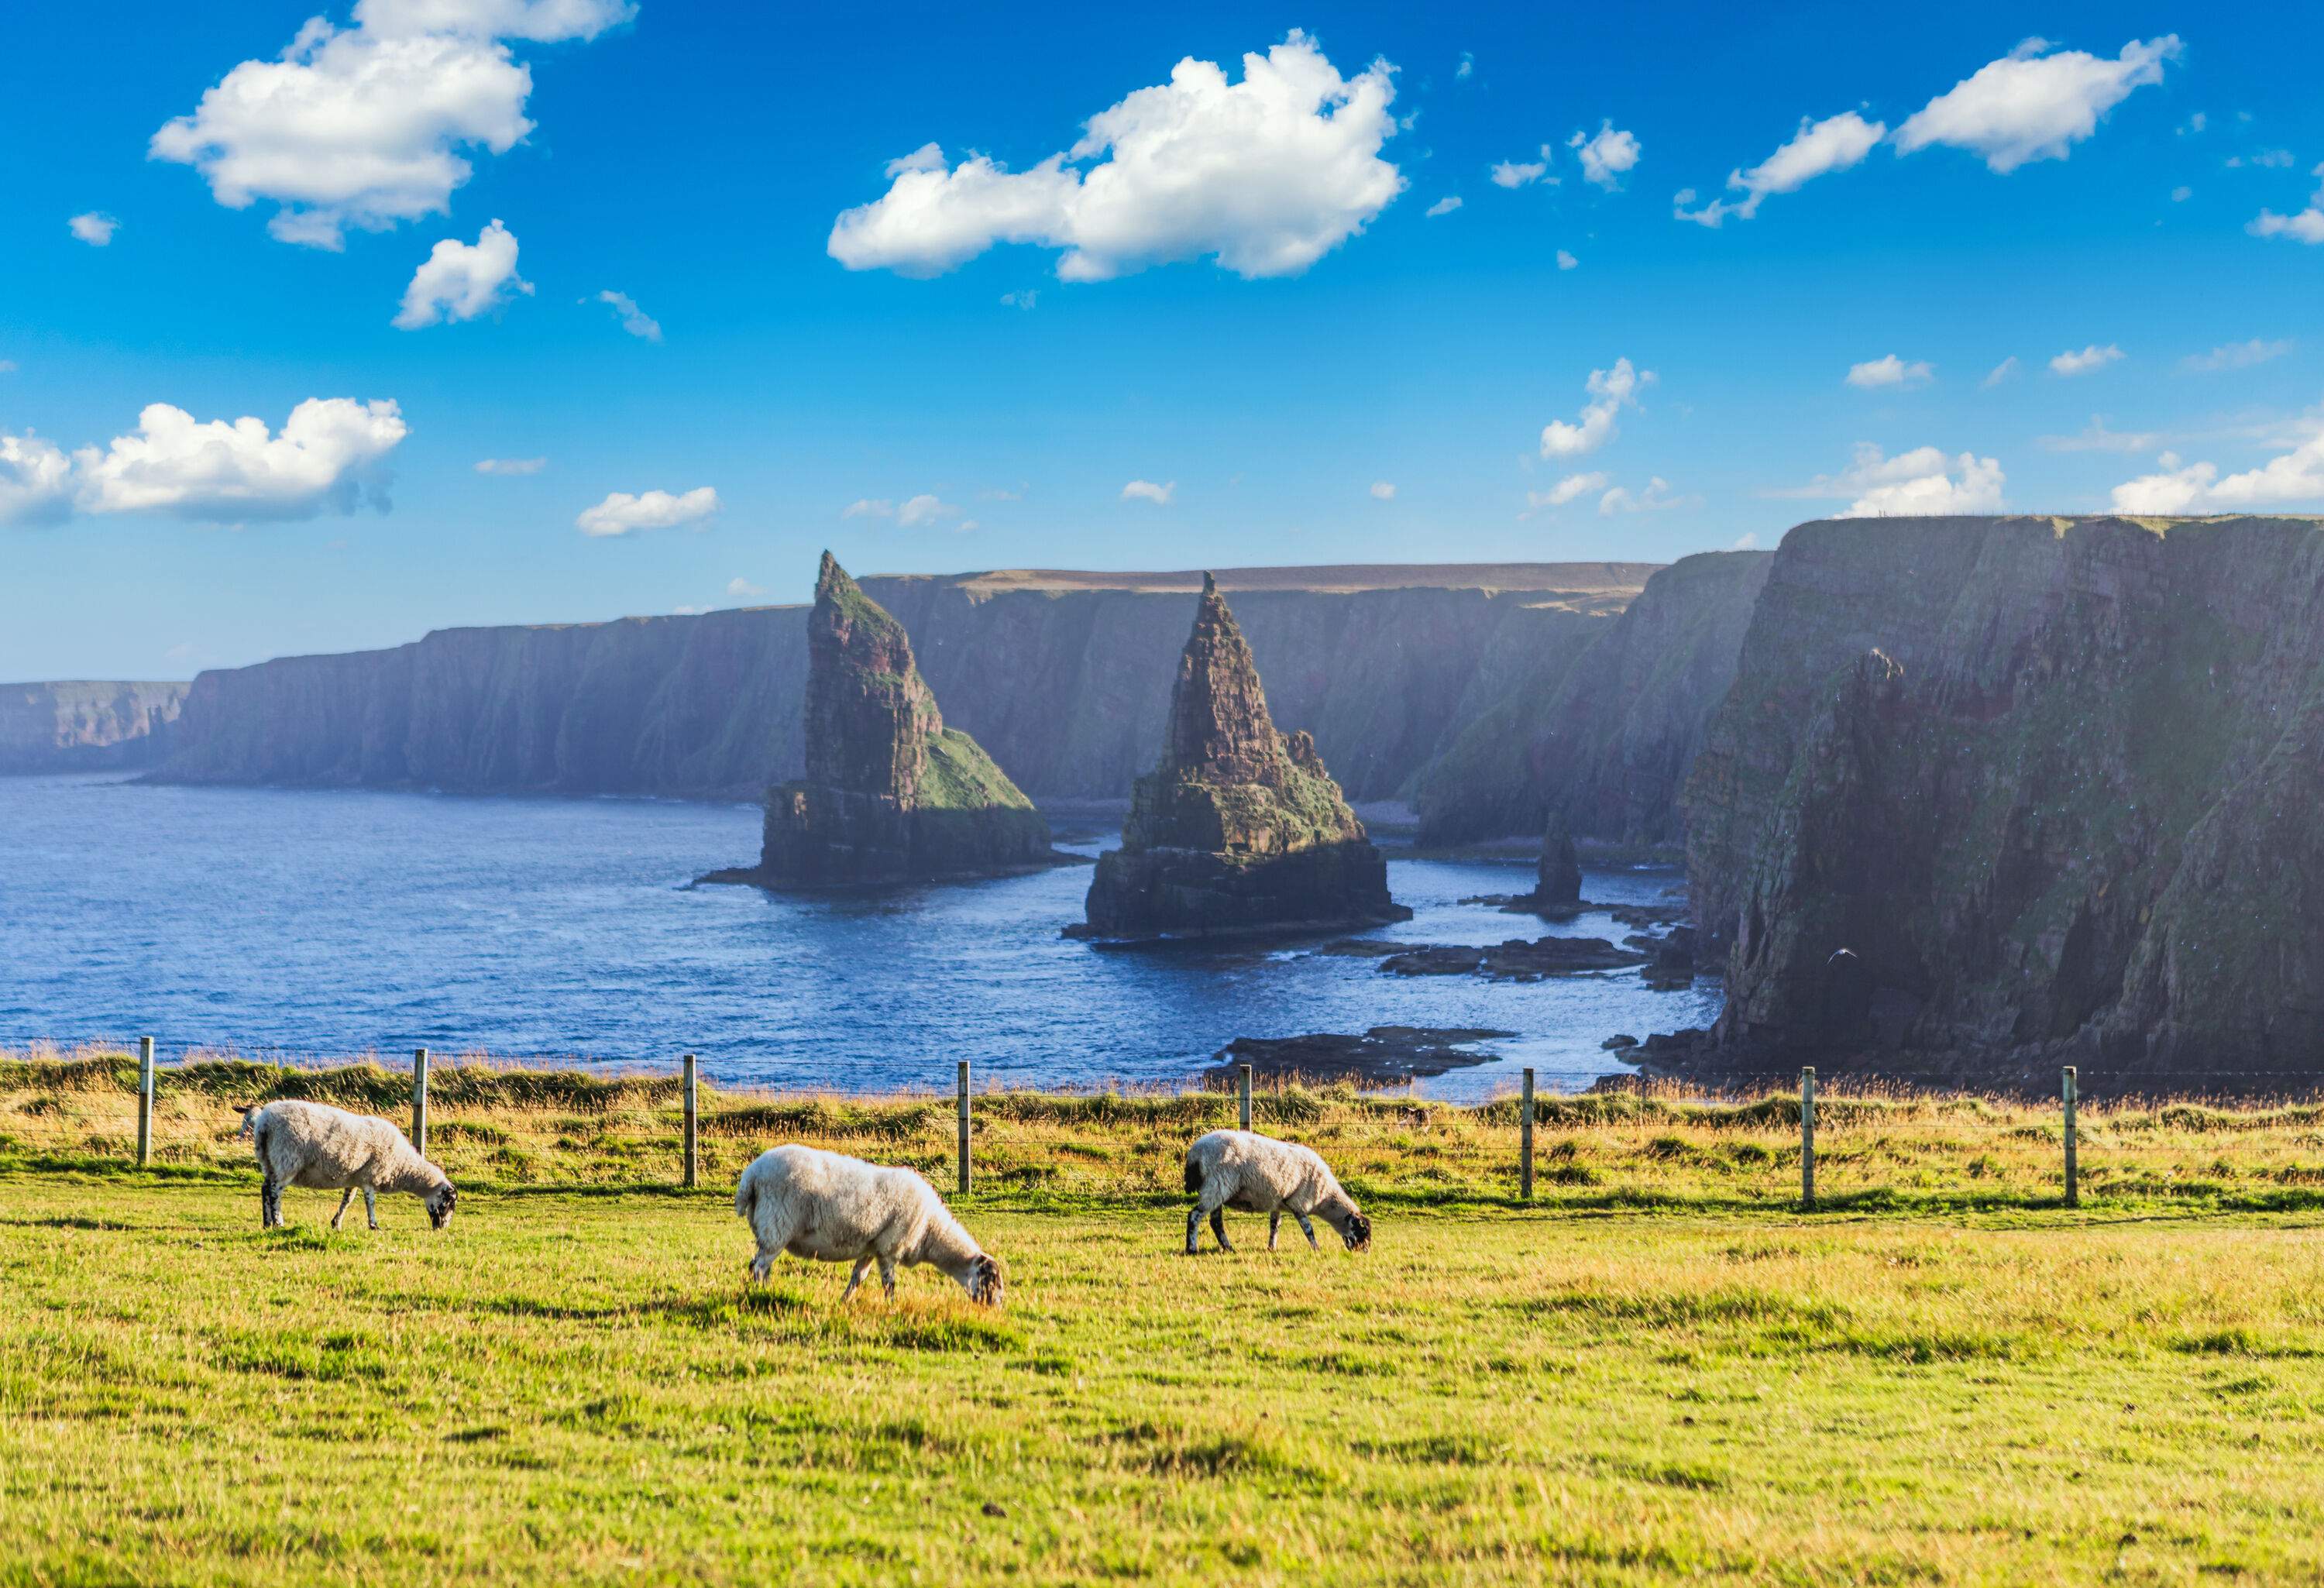 A grassland with grazing sheep overlooking two pointed rock formations in the ocean along the cliffs.